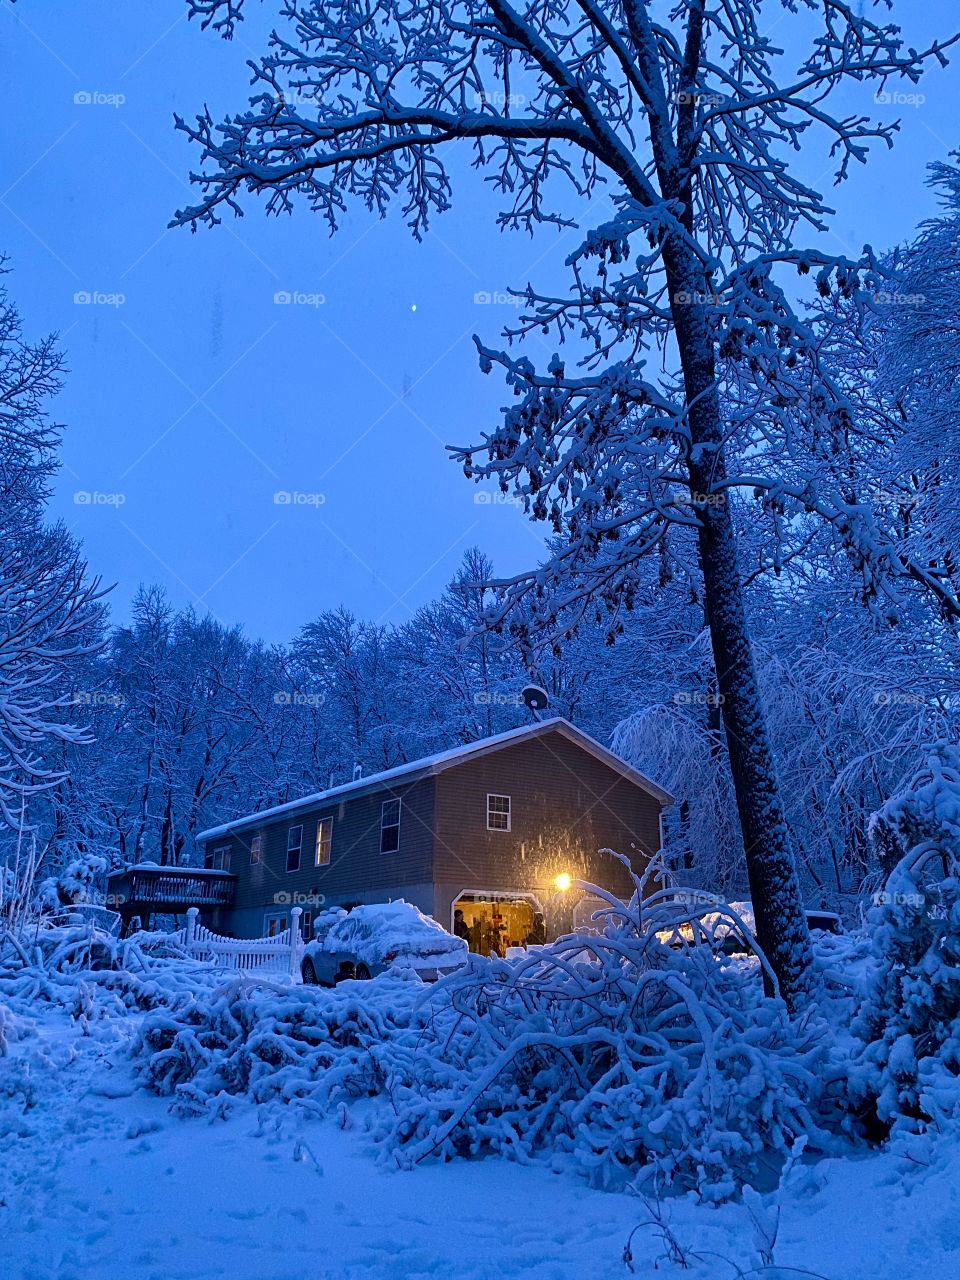 Snow covered scenery and house with garage light on during a heavy snow storm 